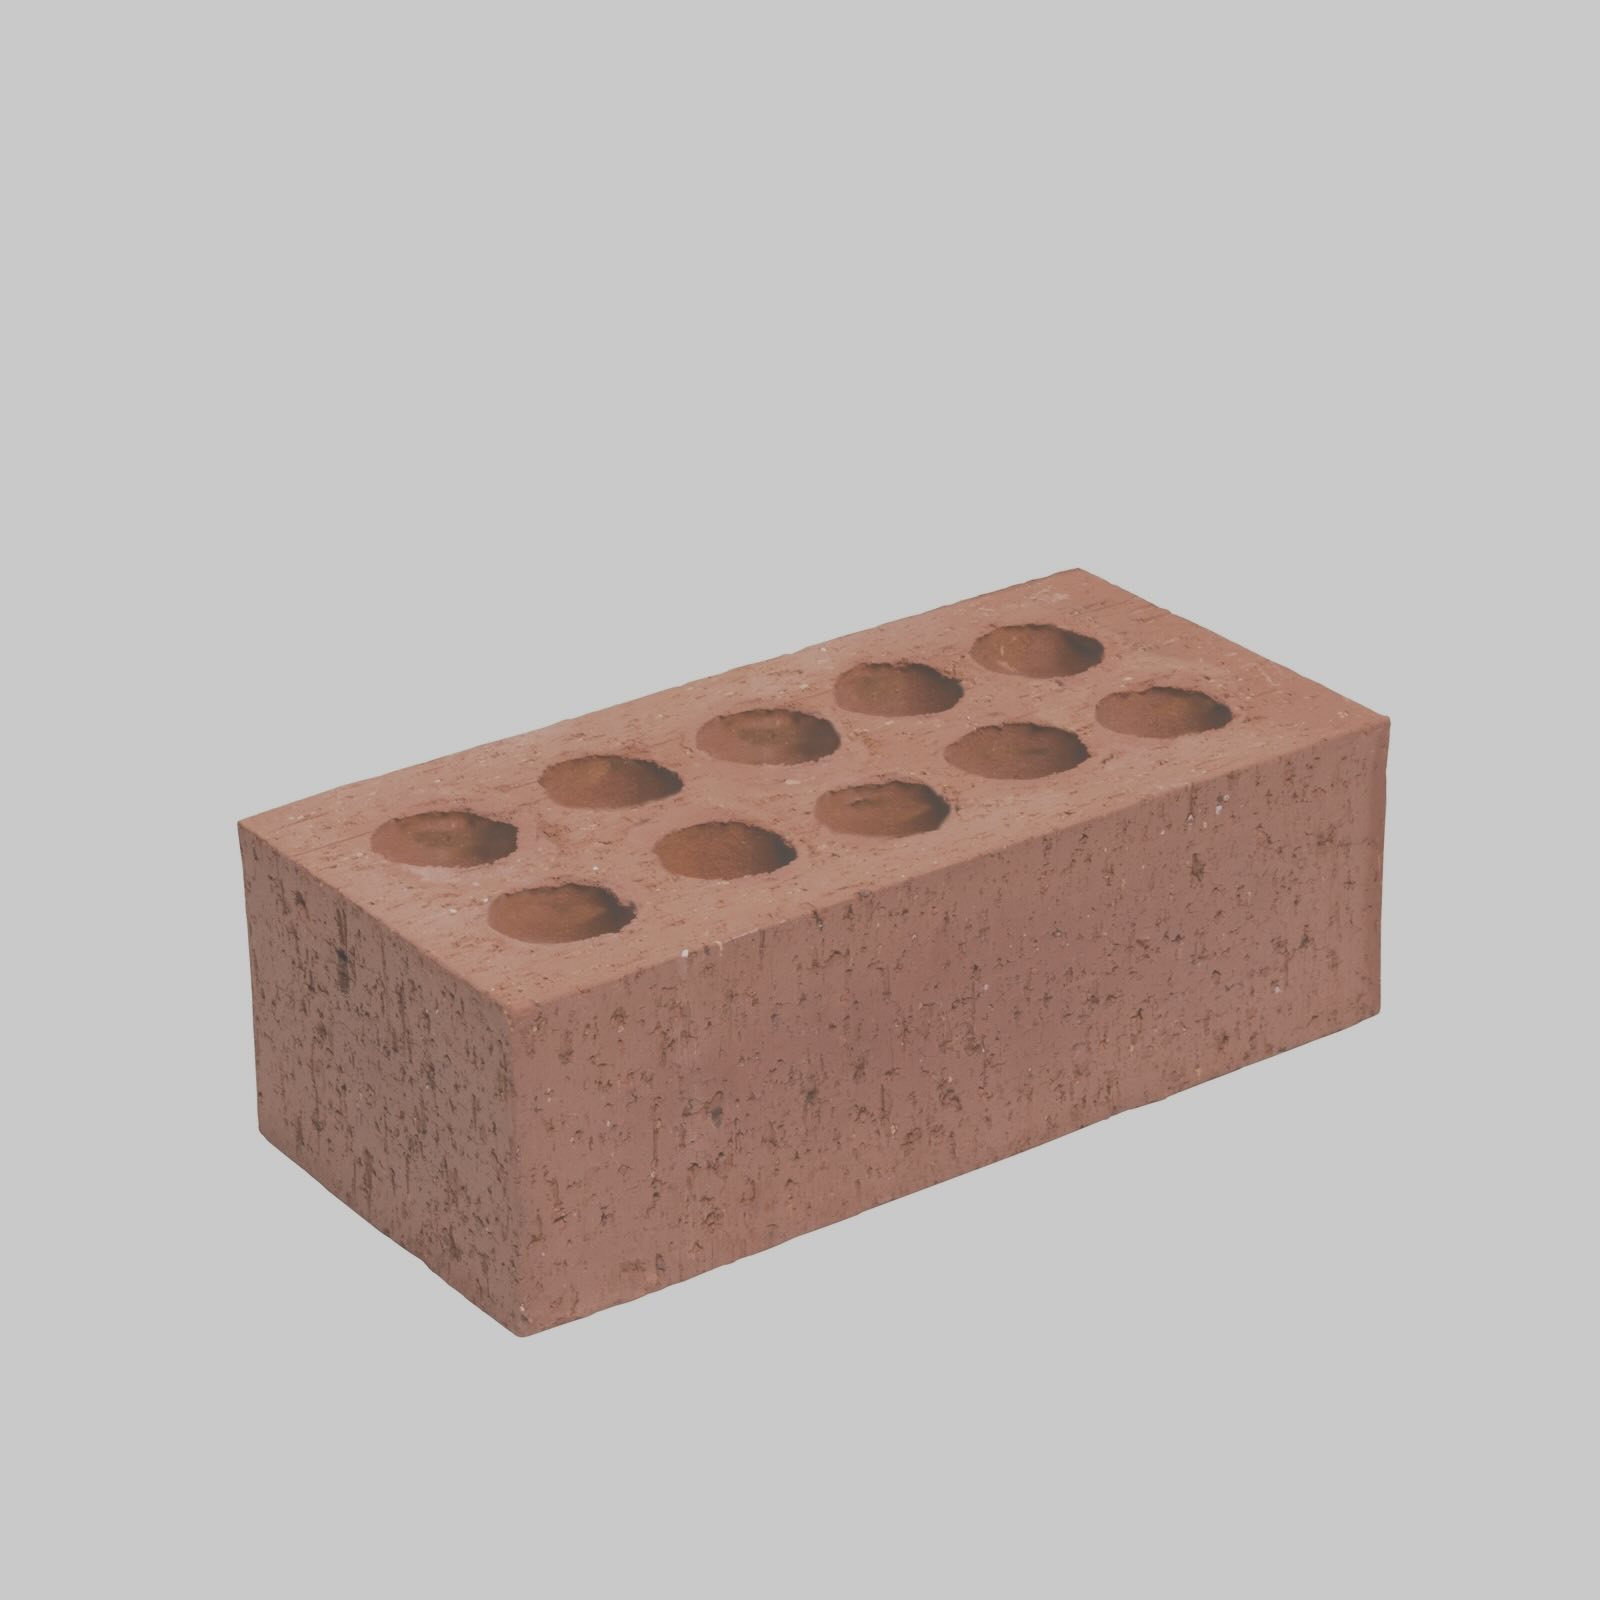 How Many Grams Are In A Brick